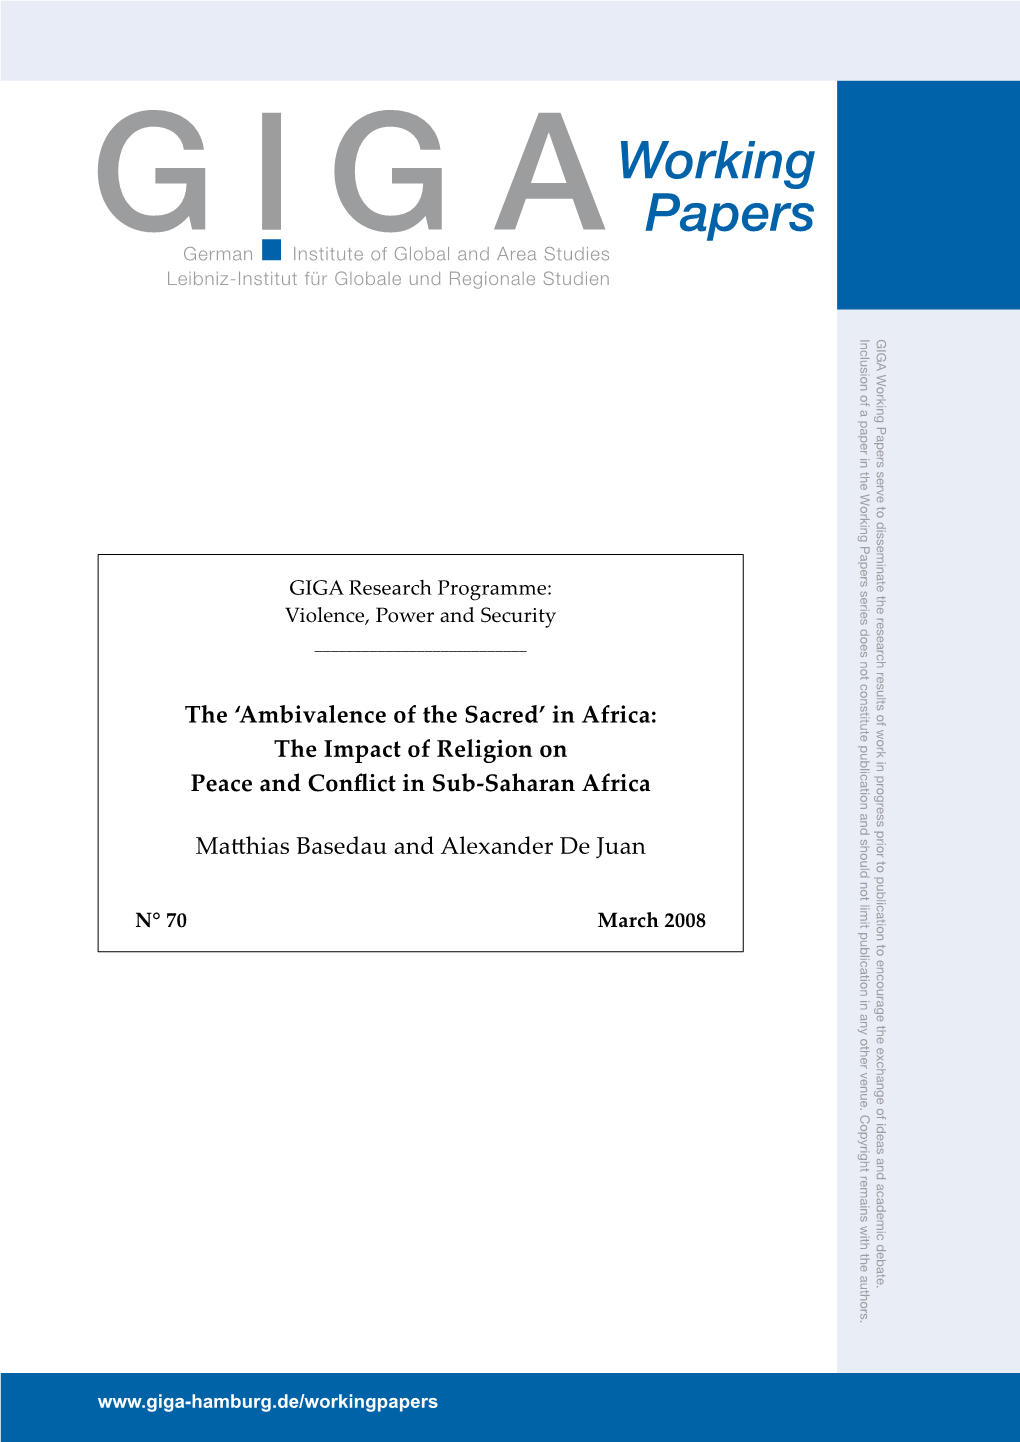 "Ambivalence of the Sacred" in Africa